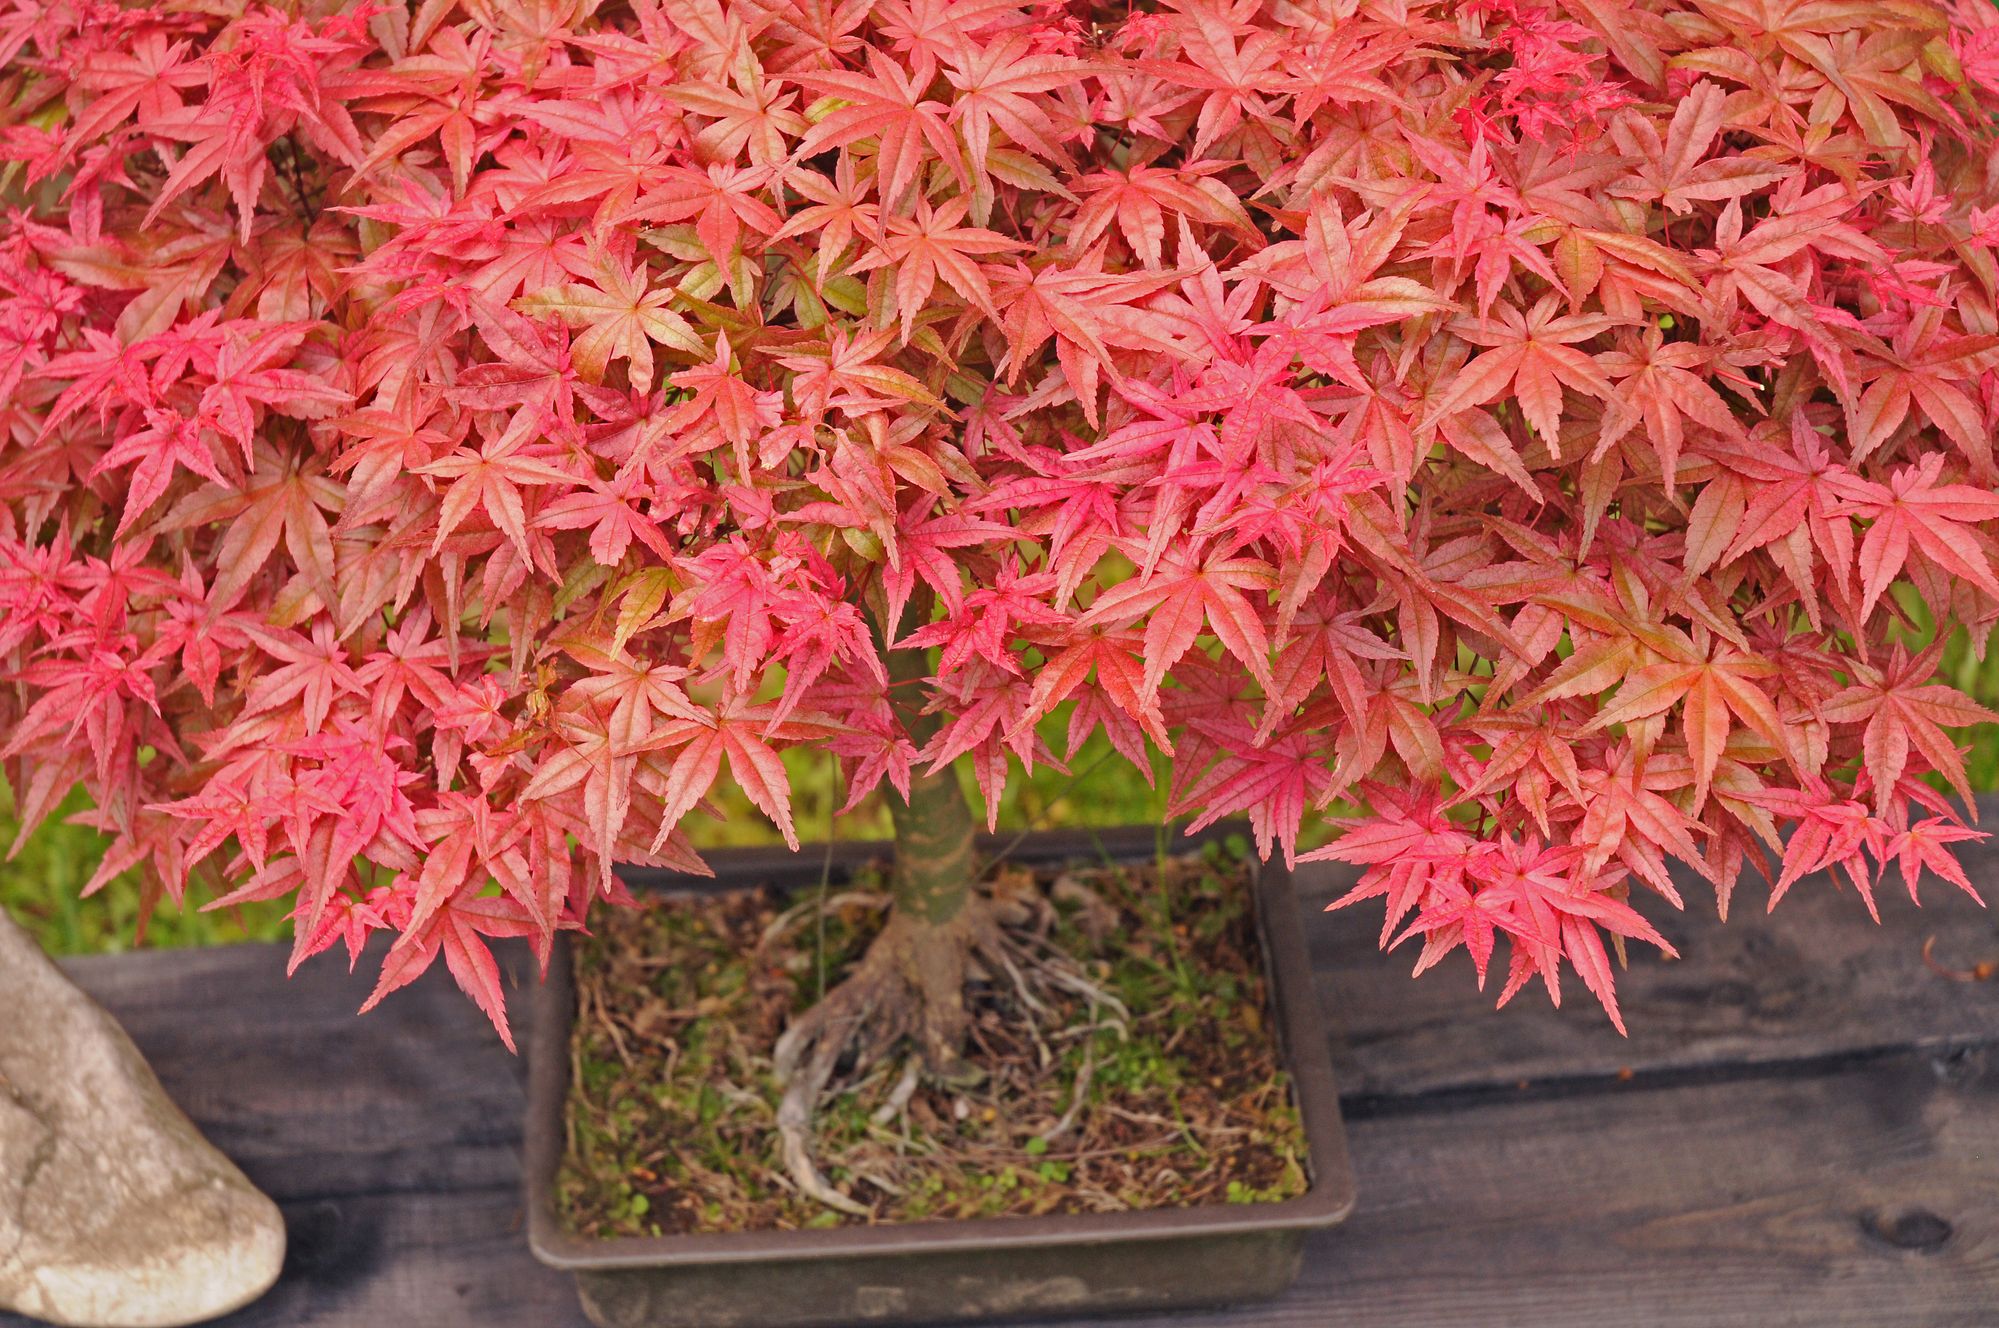 Salmon pink colored leaves of little bonsai tree planted in a rectangular pot